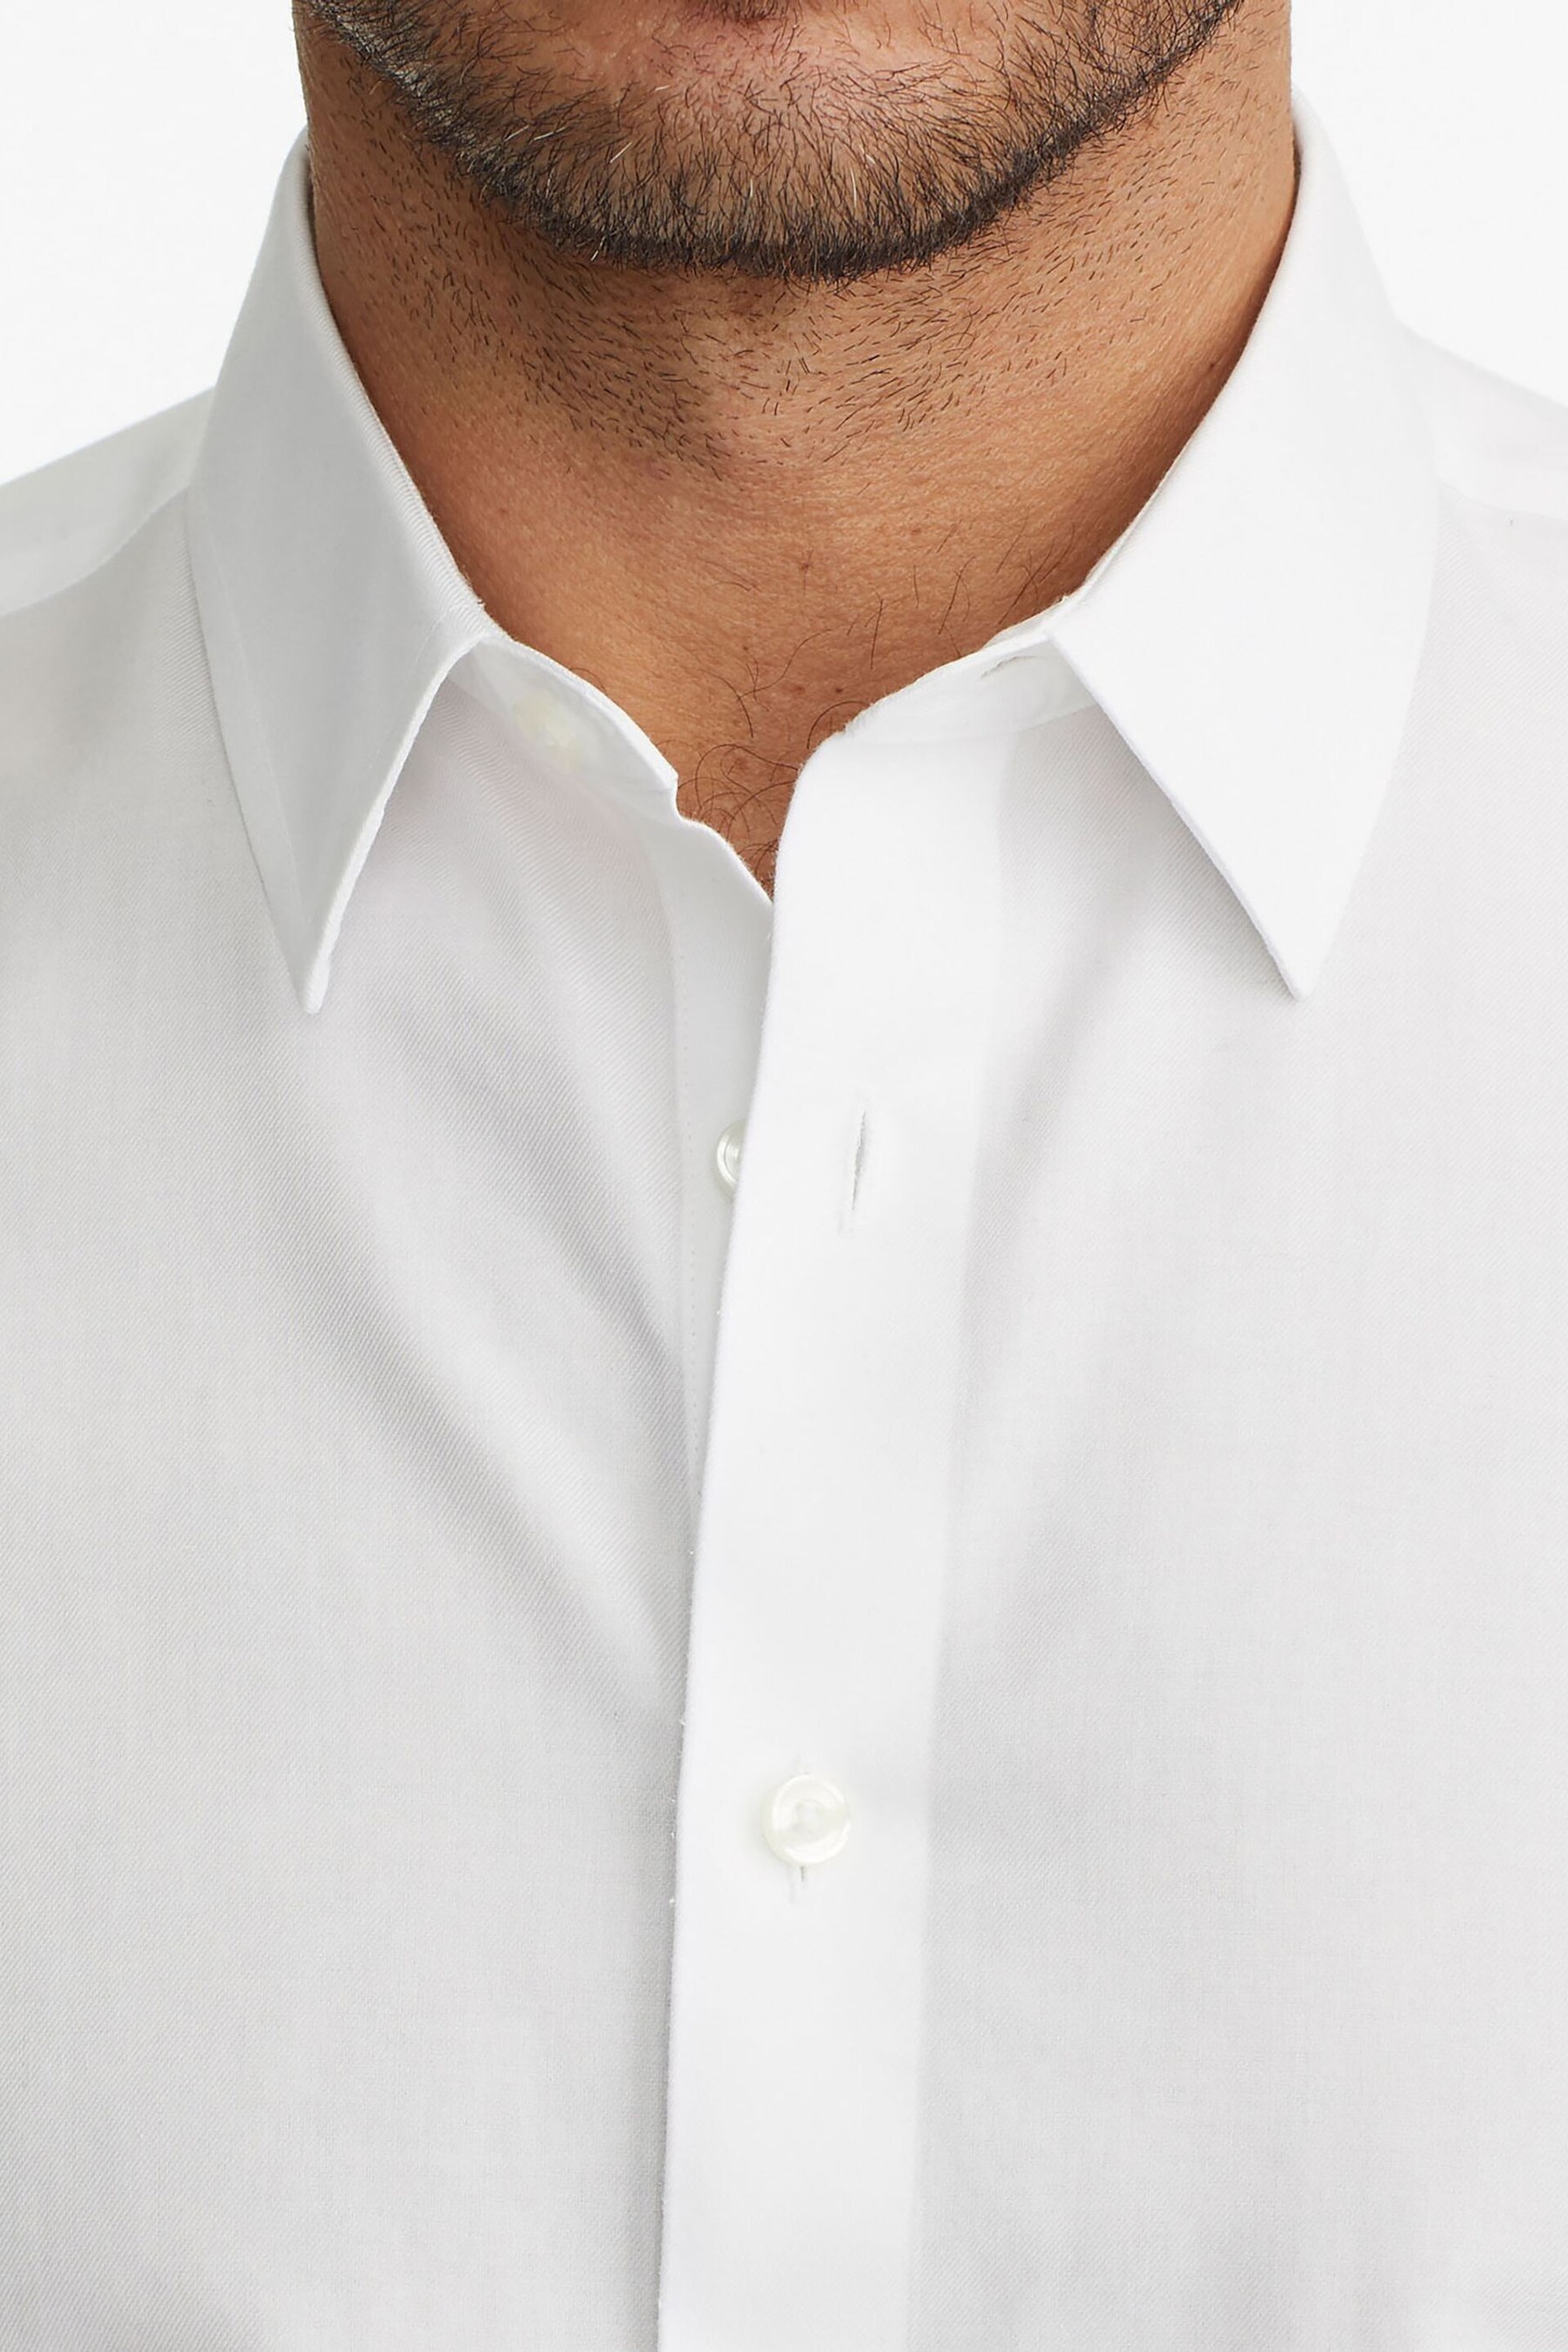 UNTUCKit White/Blue Wrinkle-Free Relaxed Fit Las Cases Shirt - Image 3 of 3